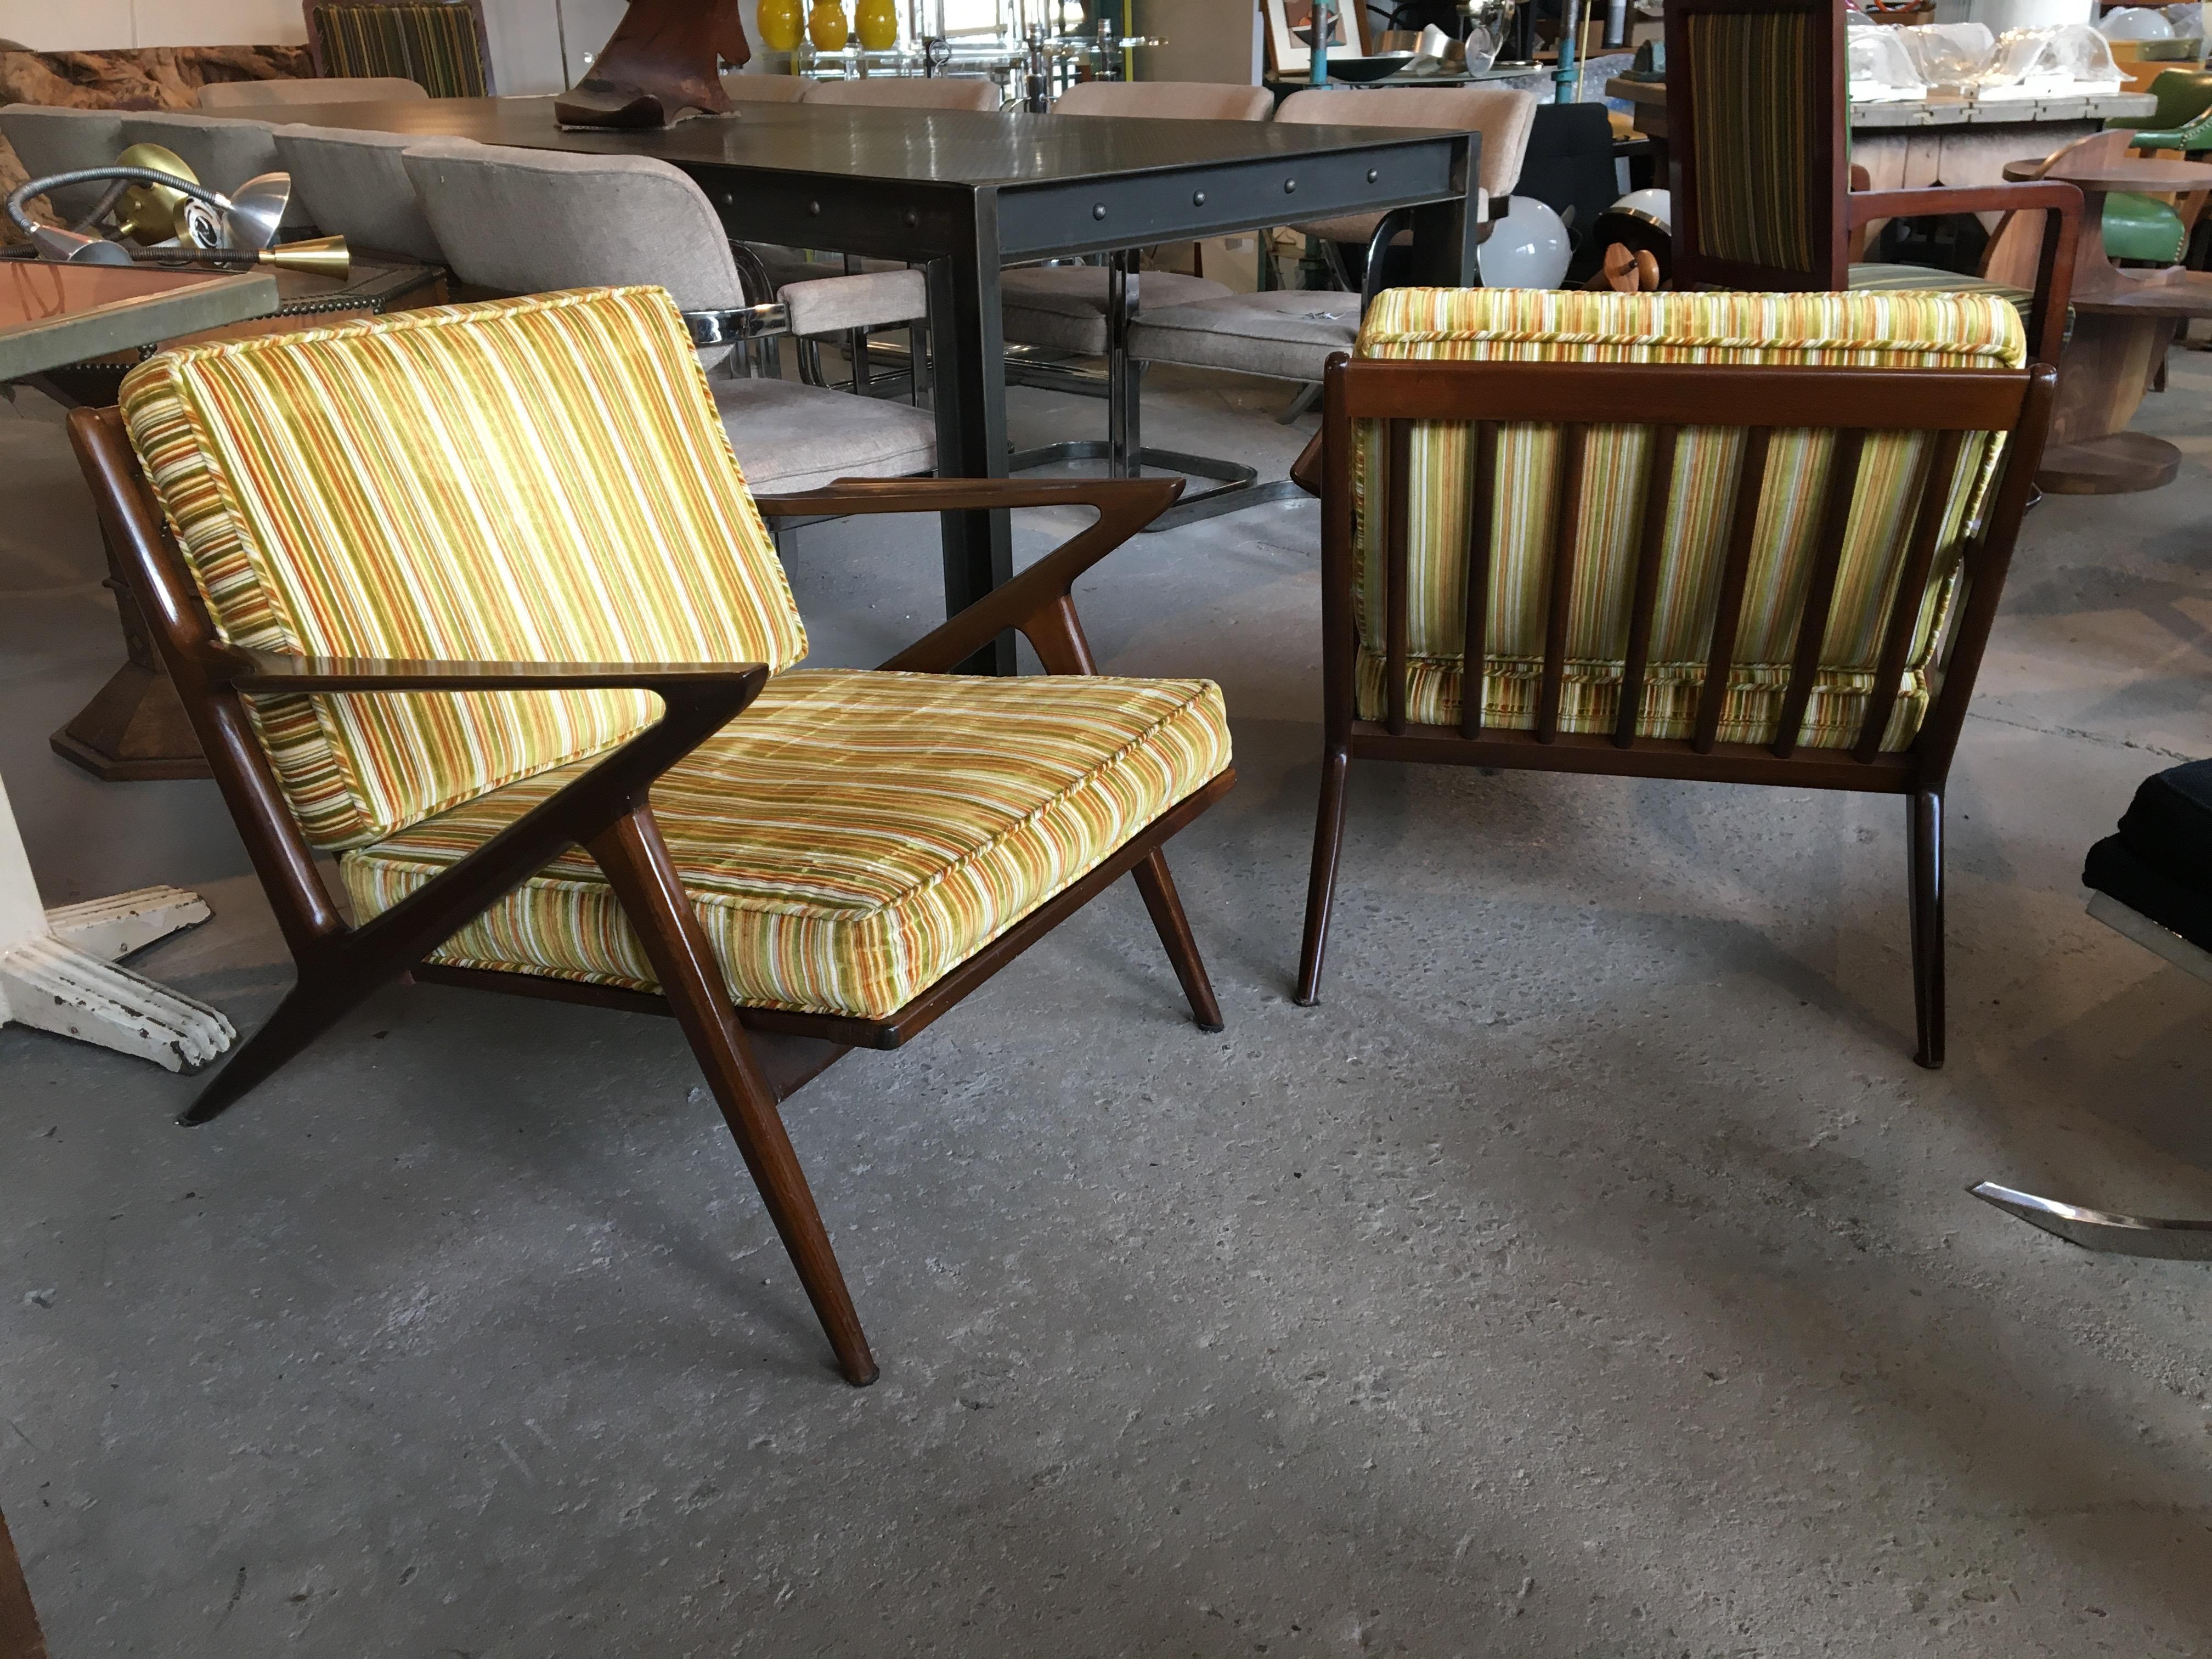 Pair of original walnut Z chairs, designed by Poul Jensen for Selig, circa 1960s. Both chairs retain their original Selig made in Denmark metal mark. Wood has great rich color, and webbing in very good condition. Cushions in vintage striped